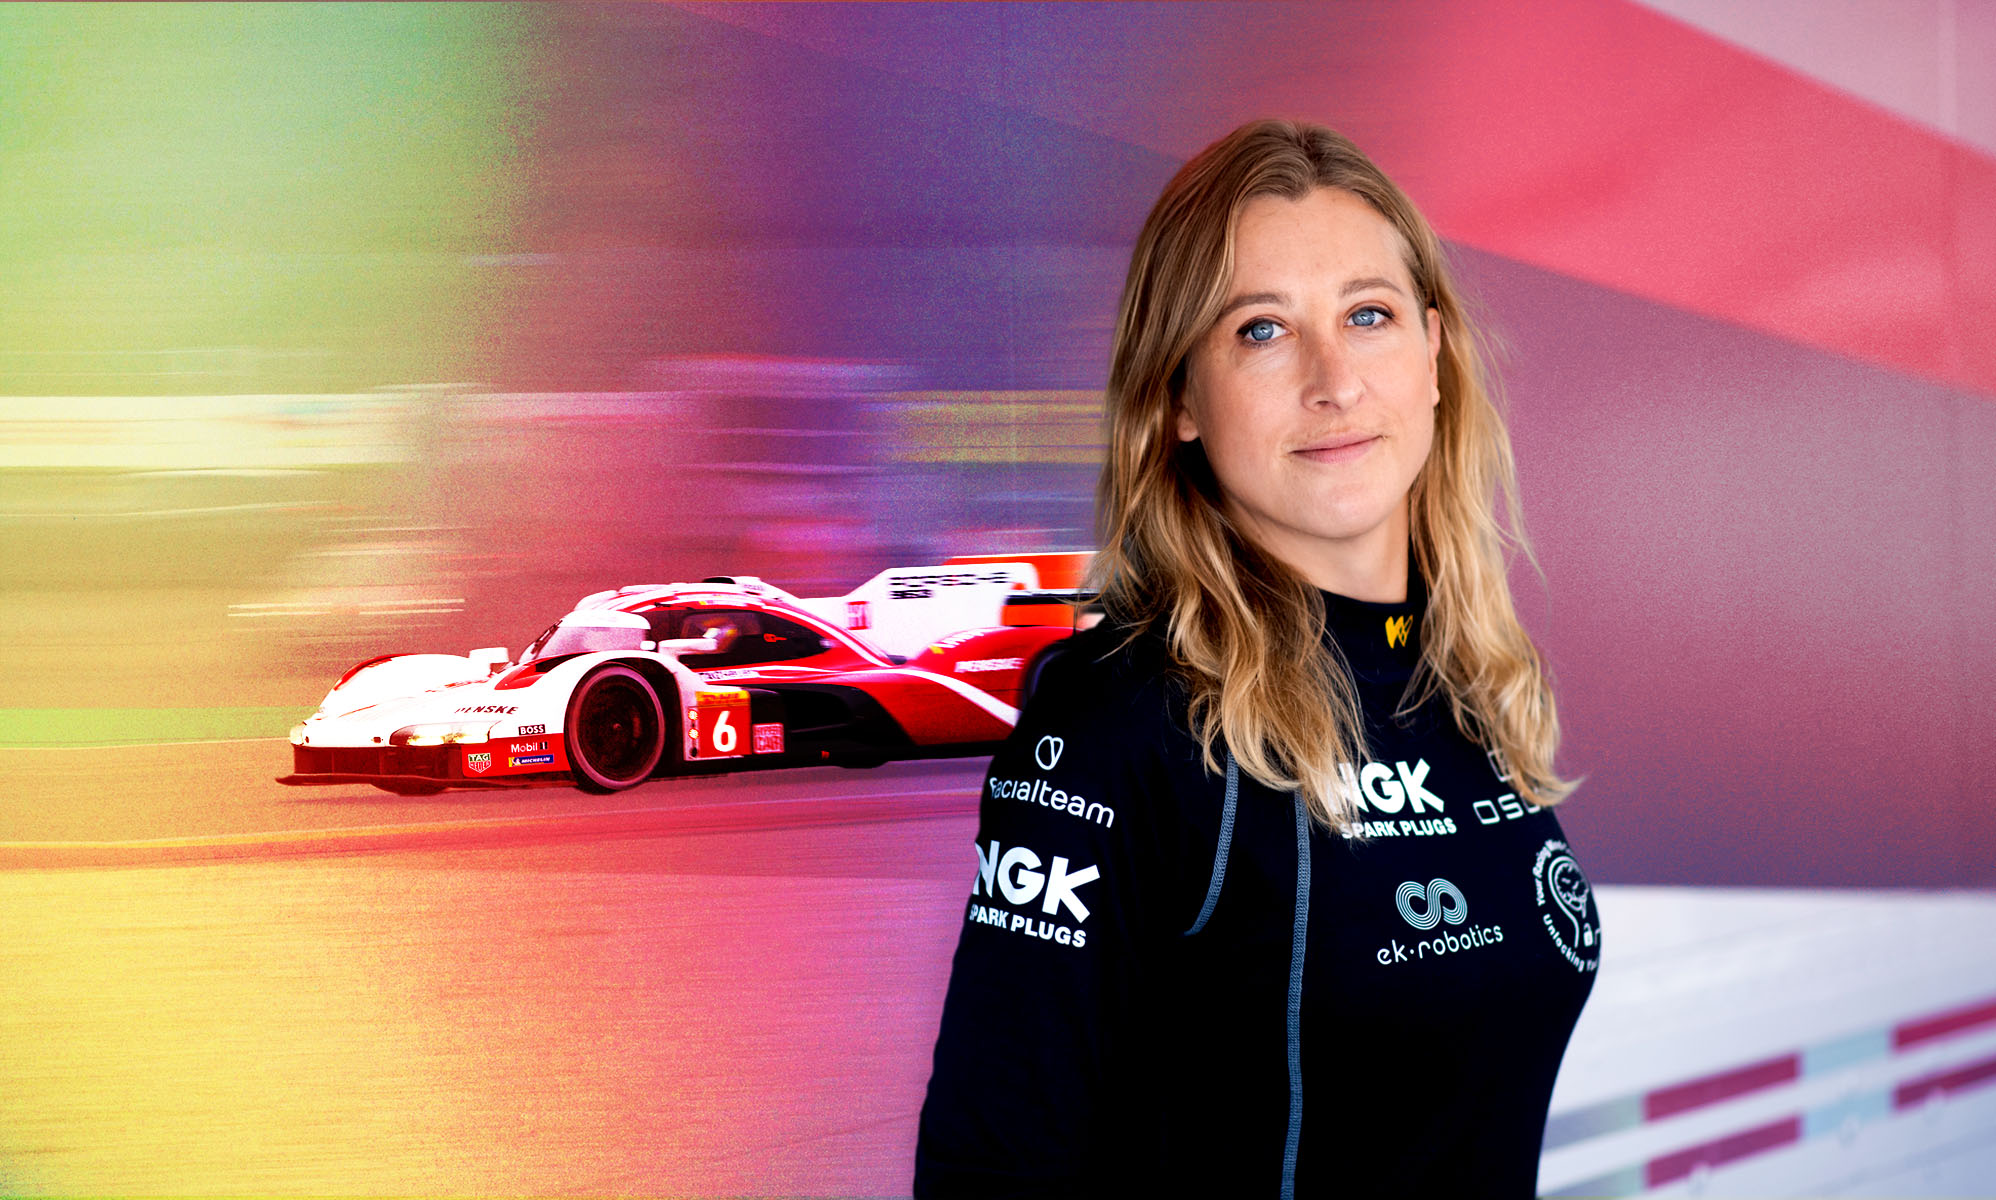 Trans racing driver Charlie Martin on track to create LGBTQ history